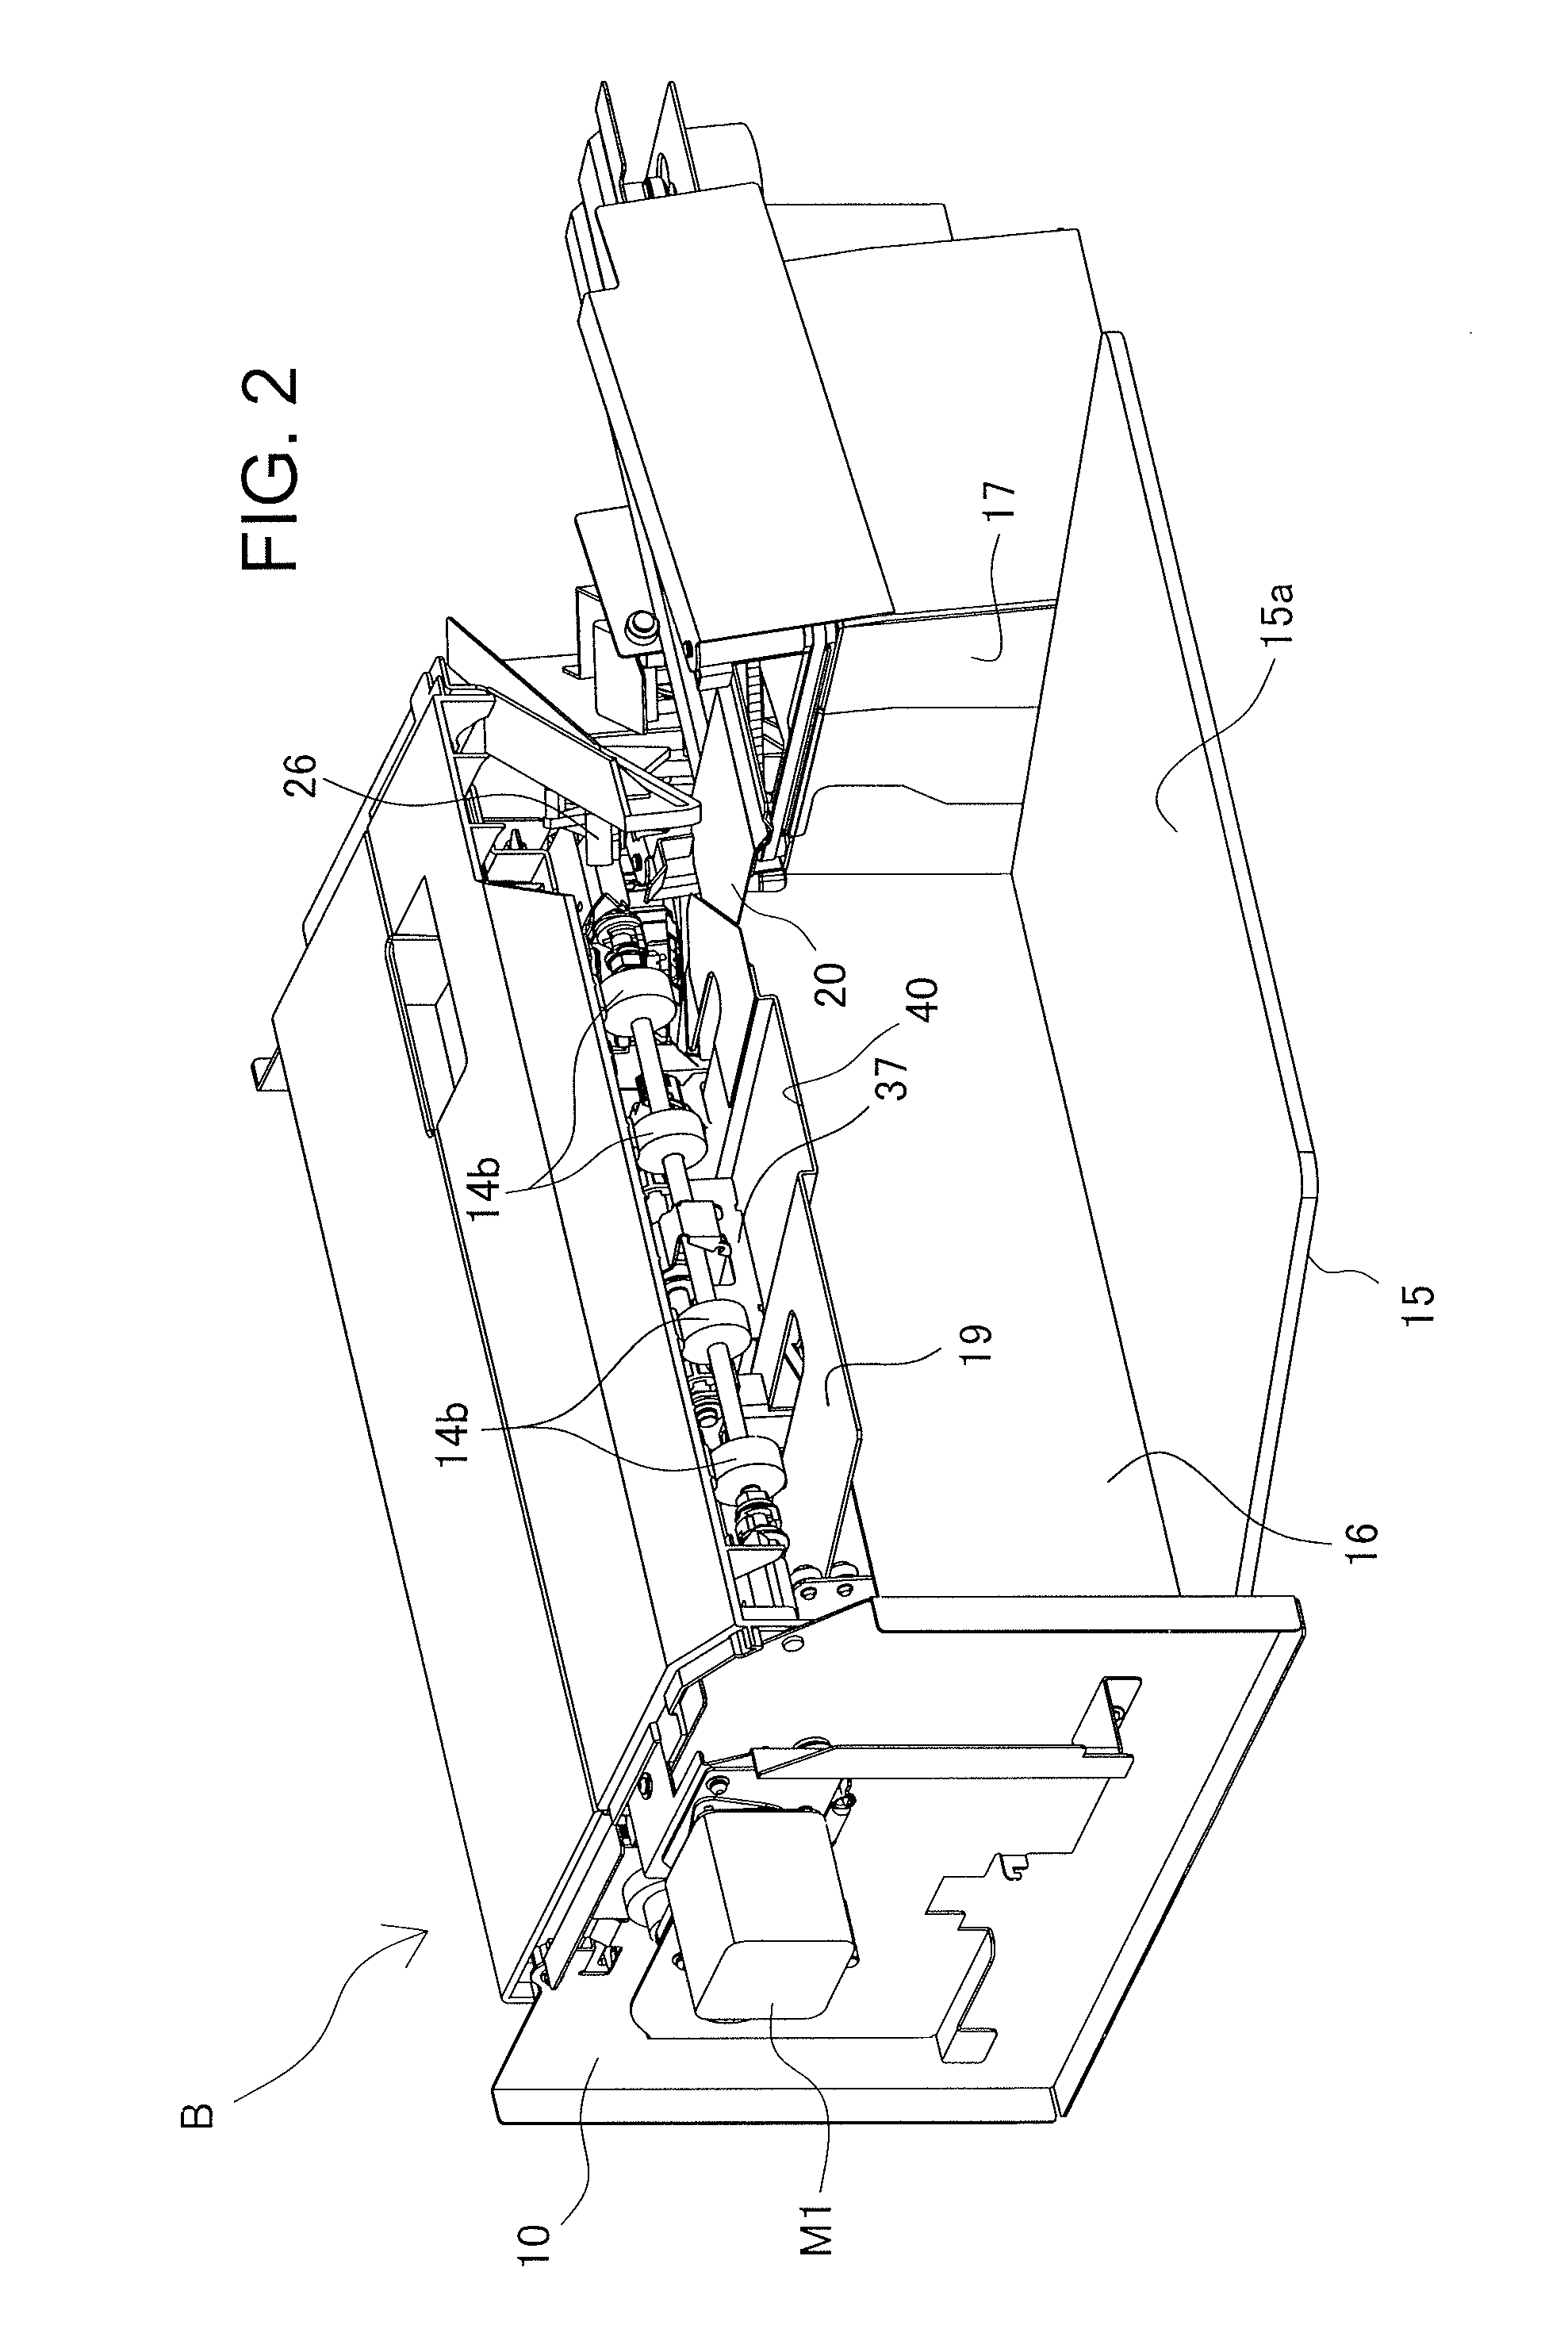 Sheet storage apparatus and image formation system using the apparatus